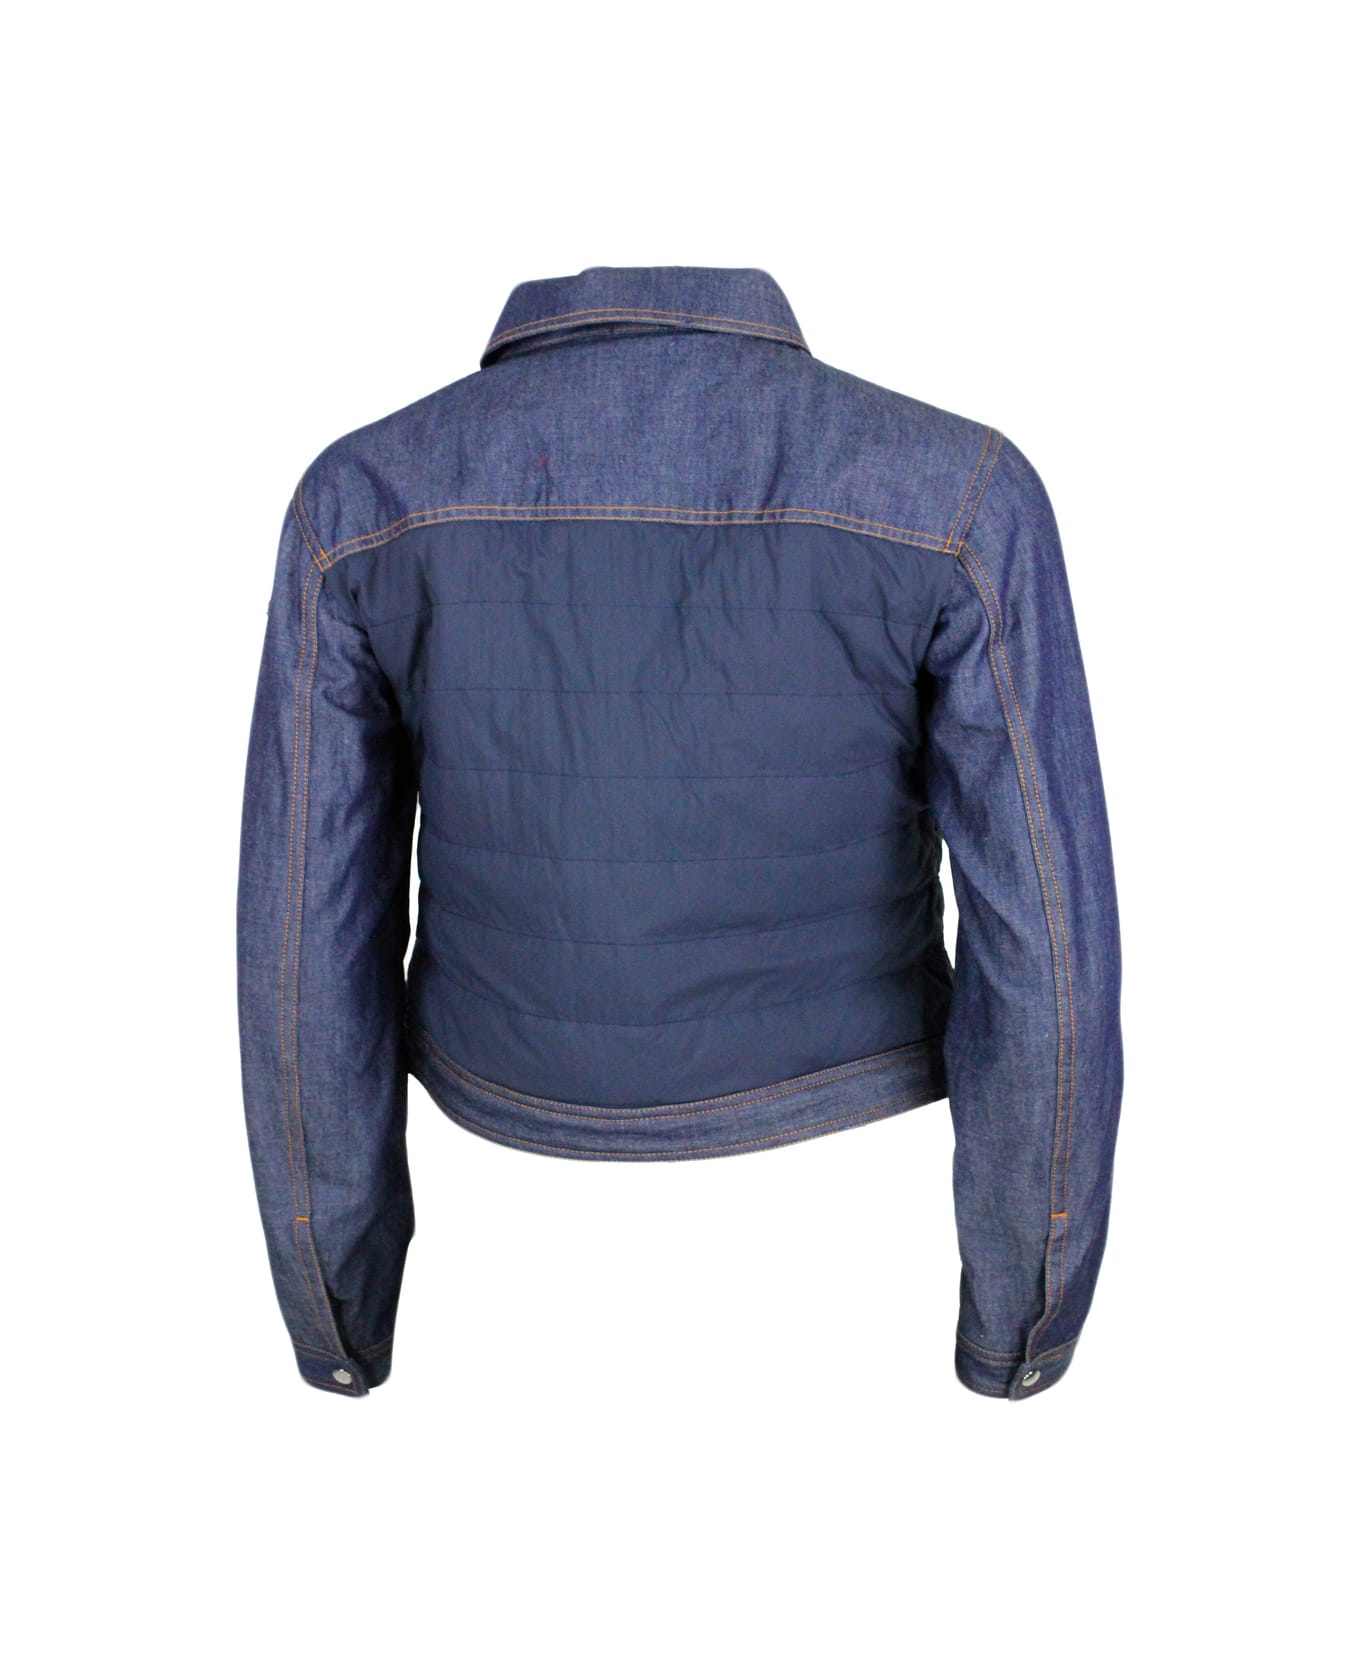 Add Jacket In Soft Denim With Lightly Padded Technical Fabric Parts And Zip Closure. - Denim